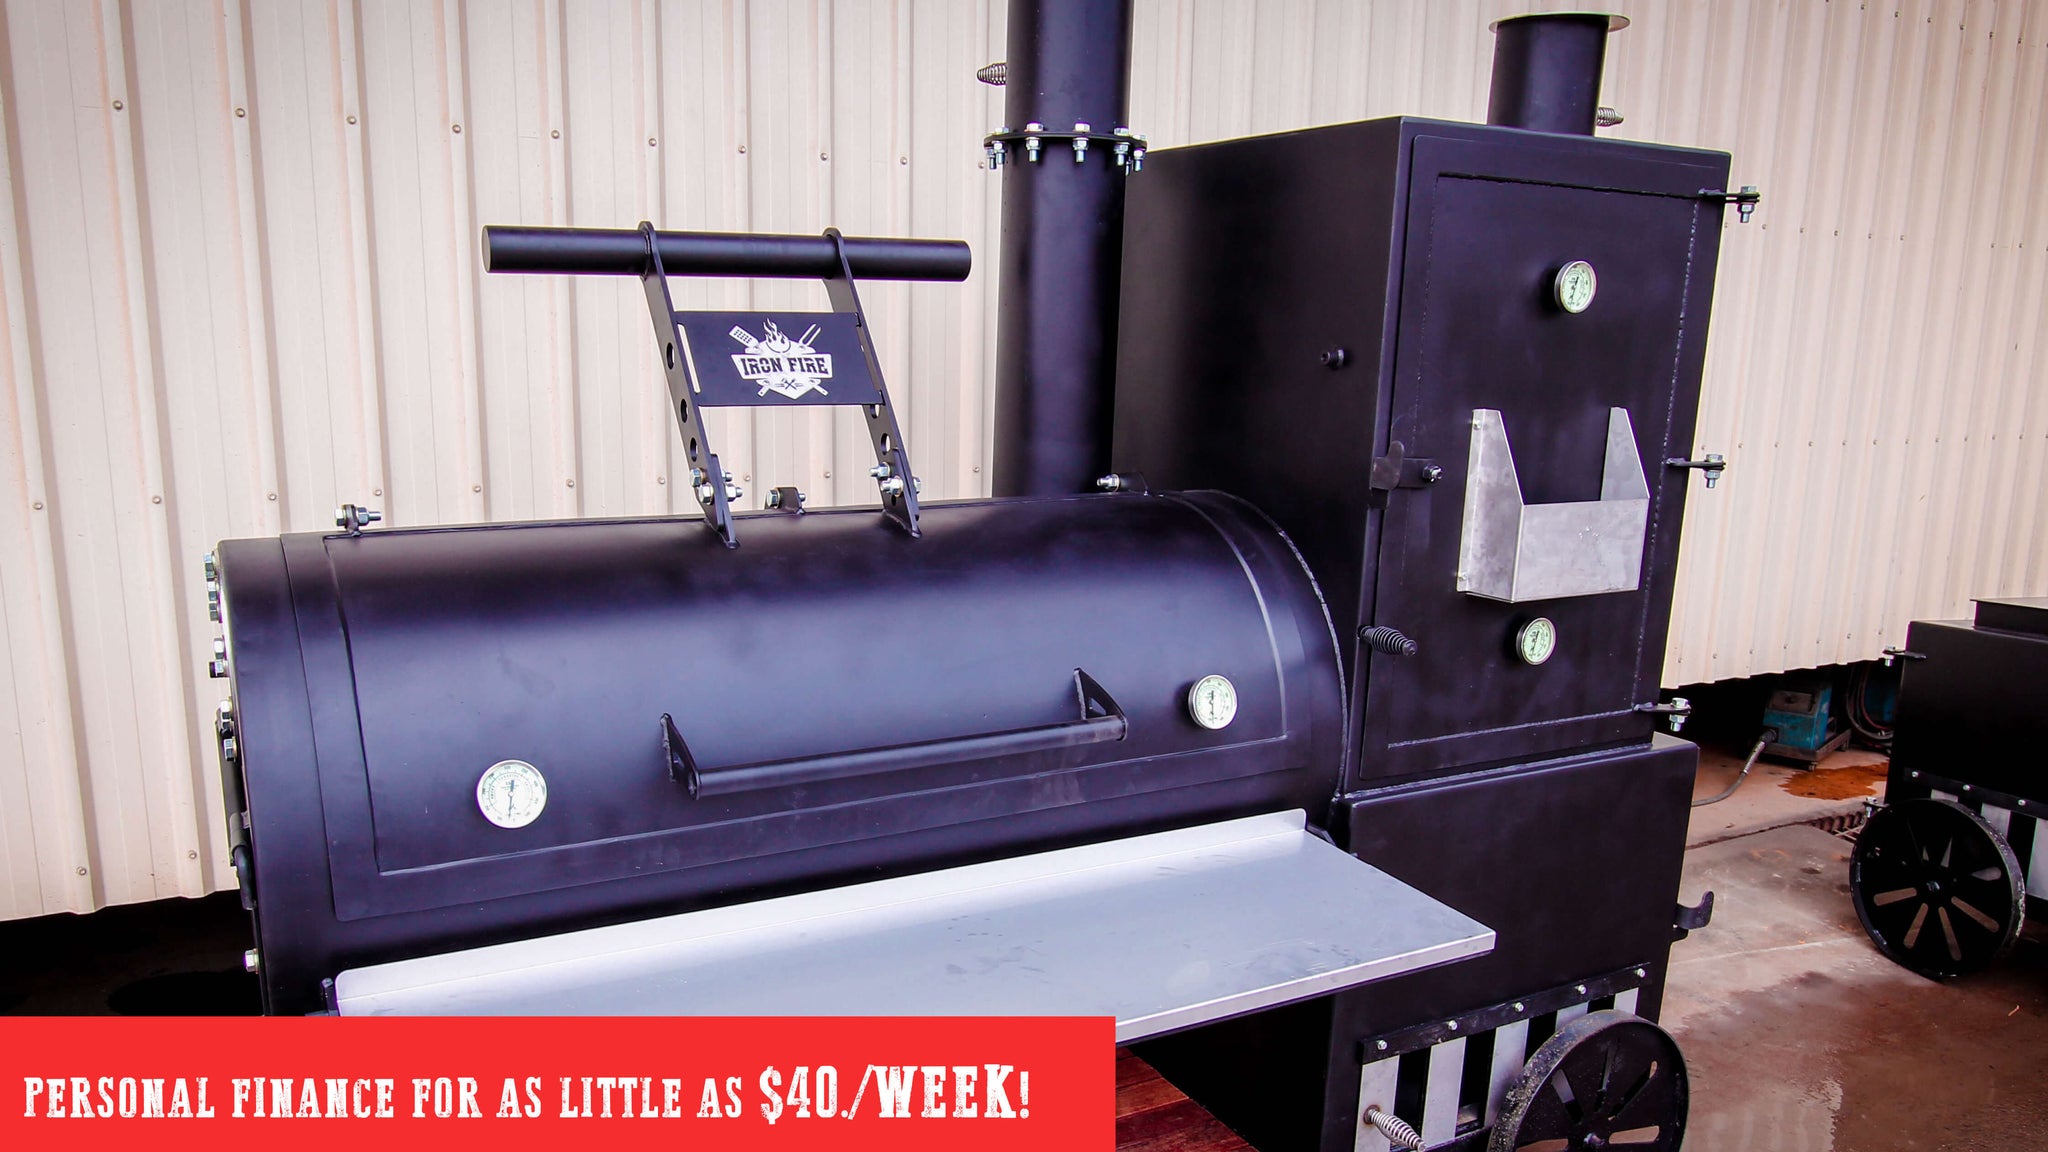 24" SMOKER WITH TOWER - LEGACY